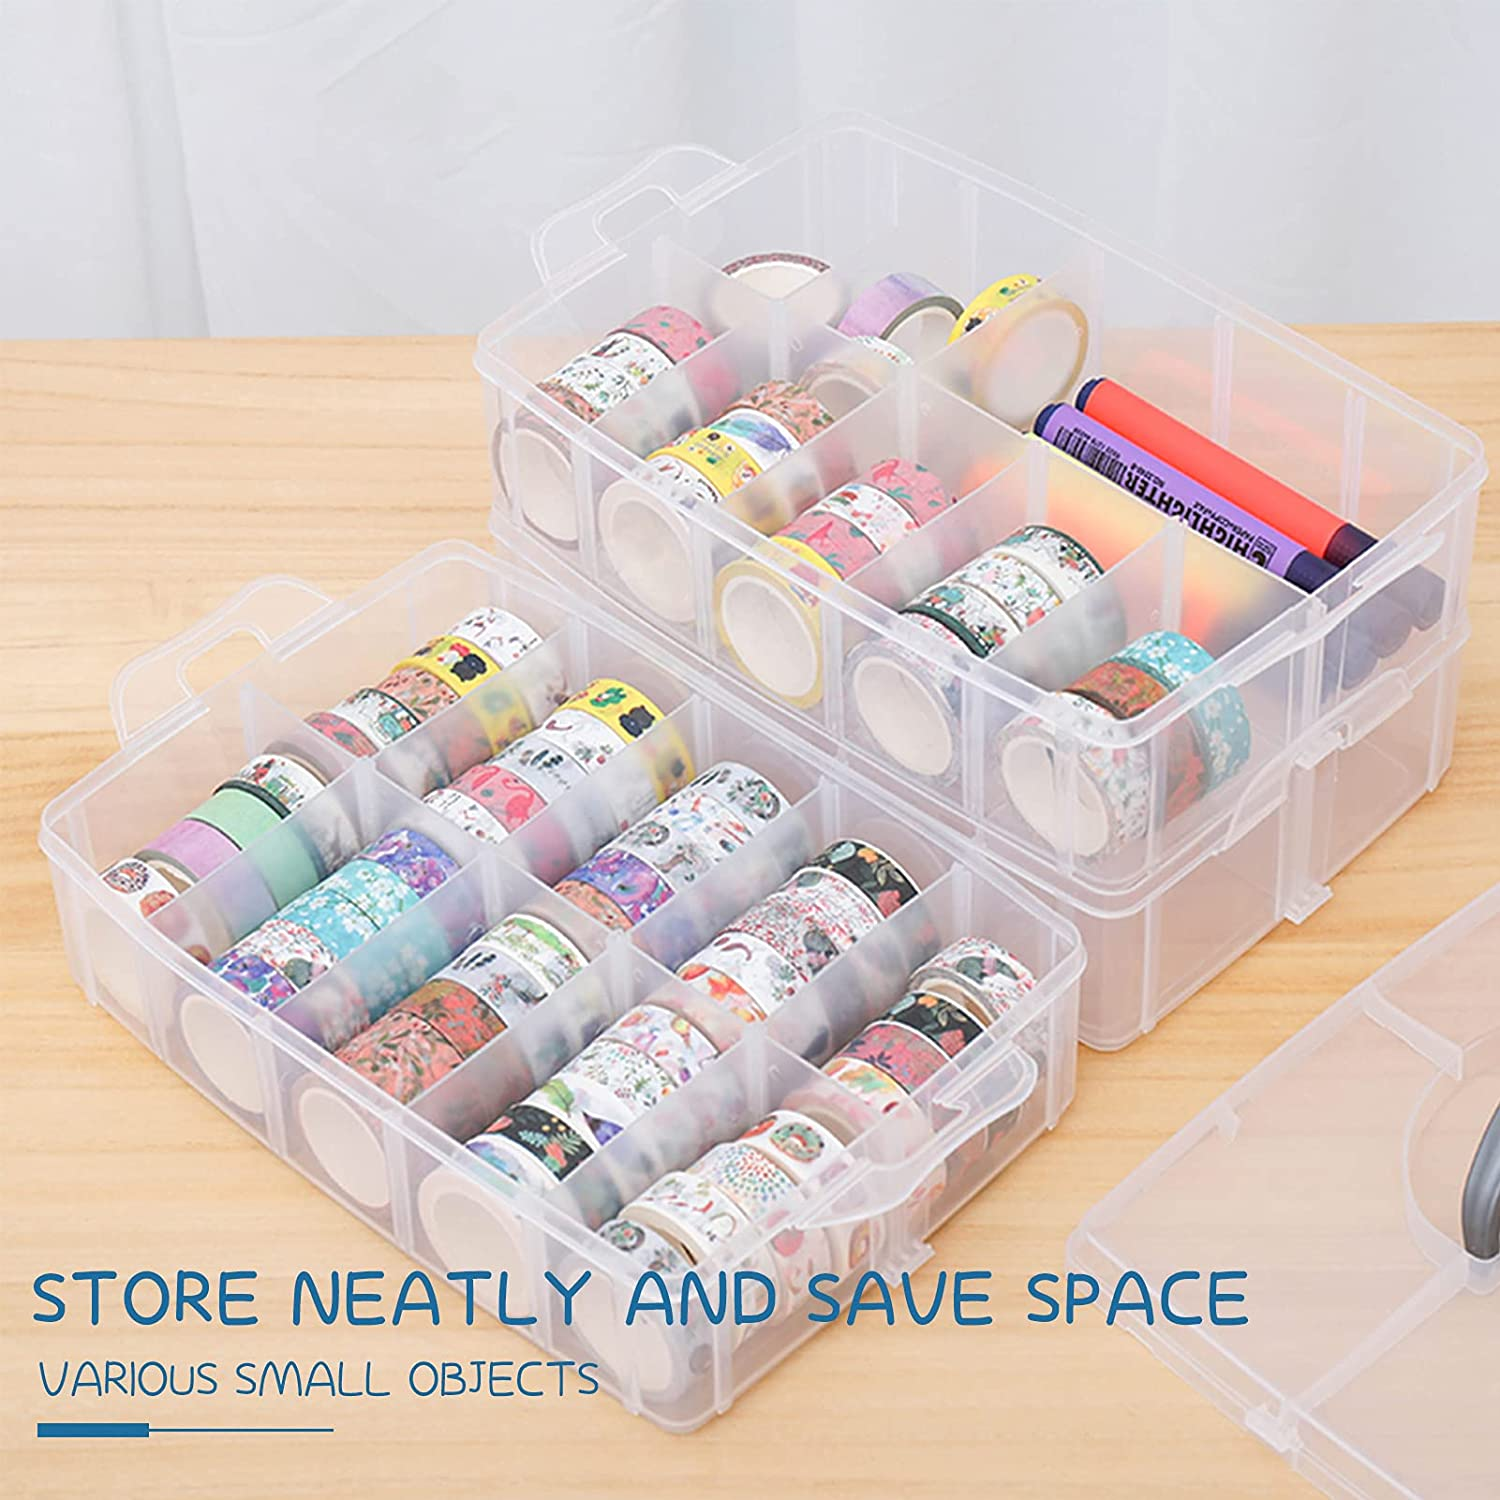 4-Tier Stackable Storage Container Box with 40 Adjustable Compartments, YOCOMEY Plastic Organizer Box Transparent Storage Case for Kids Toys, Art Crafts, Jewelry, Supplies, Fuse Beads, Washi Tapes